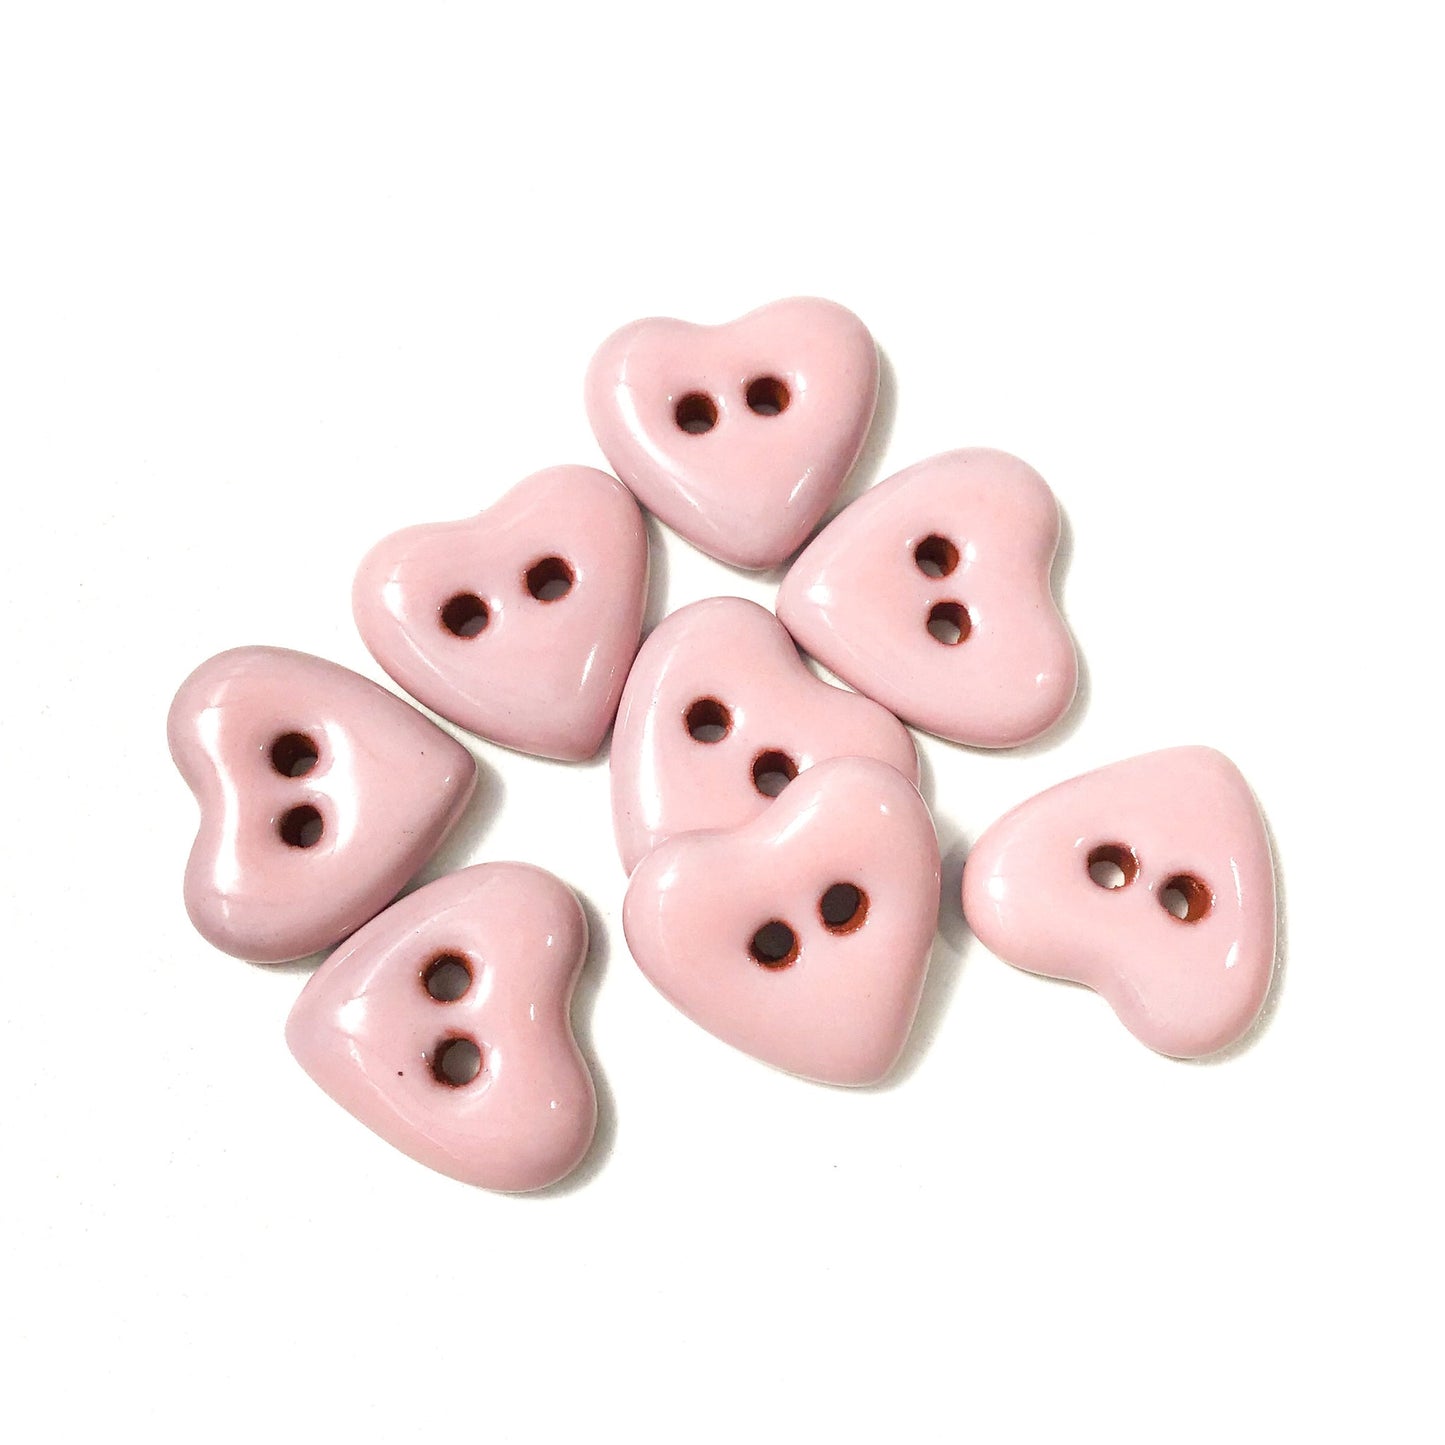 (Wholesale Accounts Only) 5/8" x 9/16" heart - pillowed - red clay (ws-174)